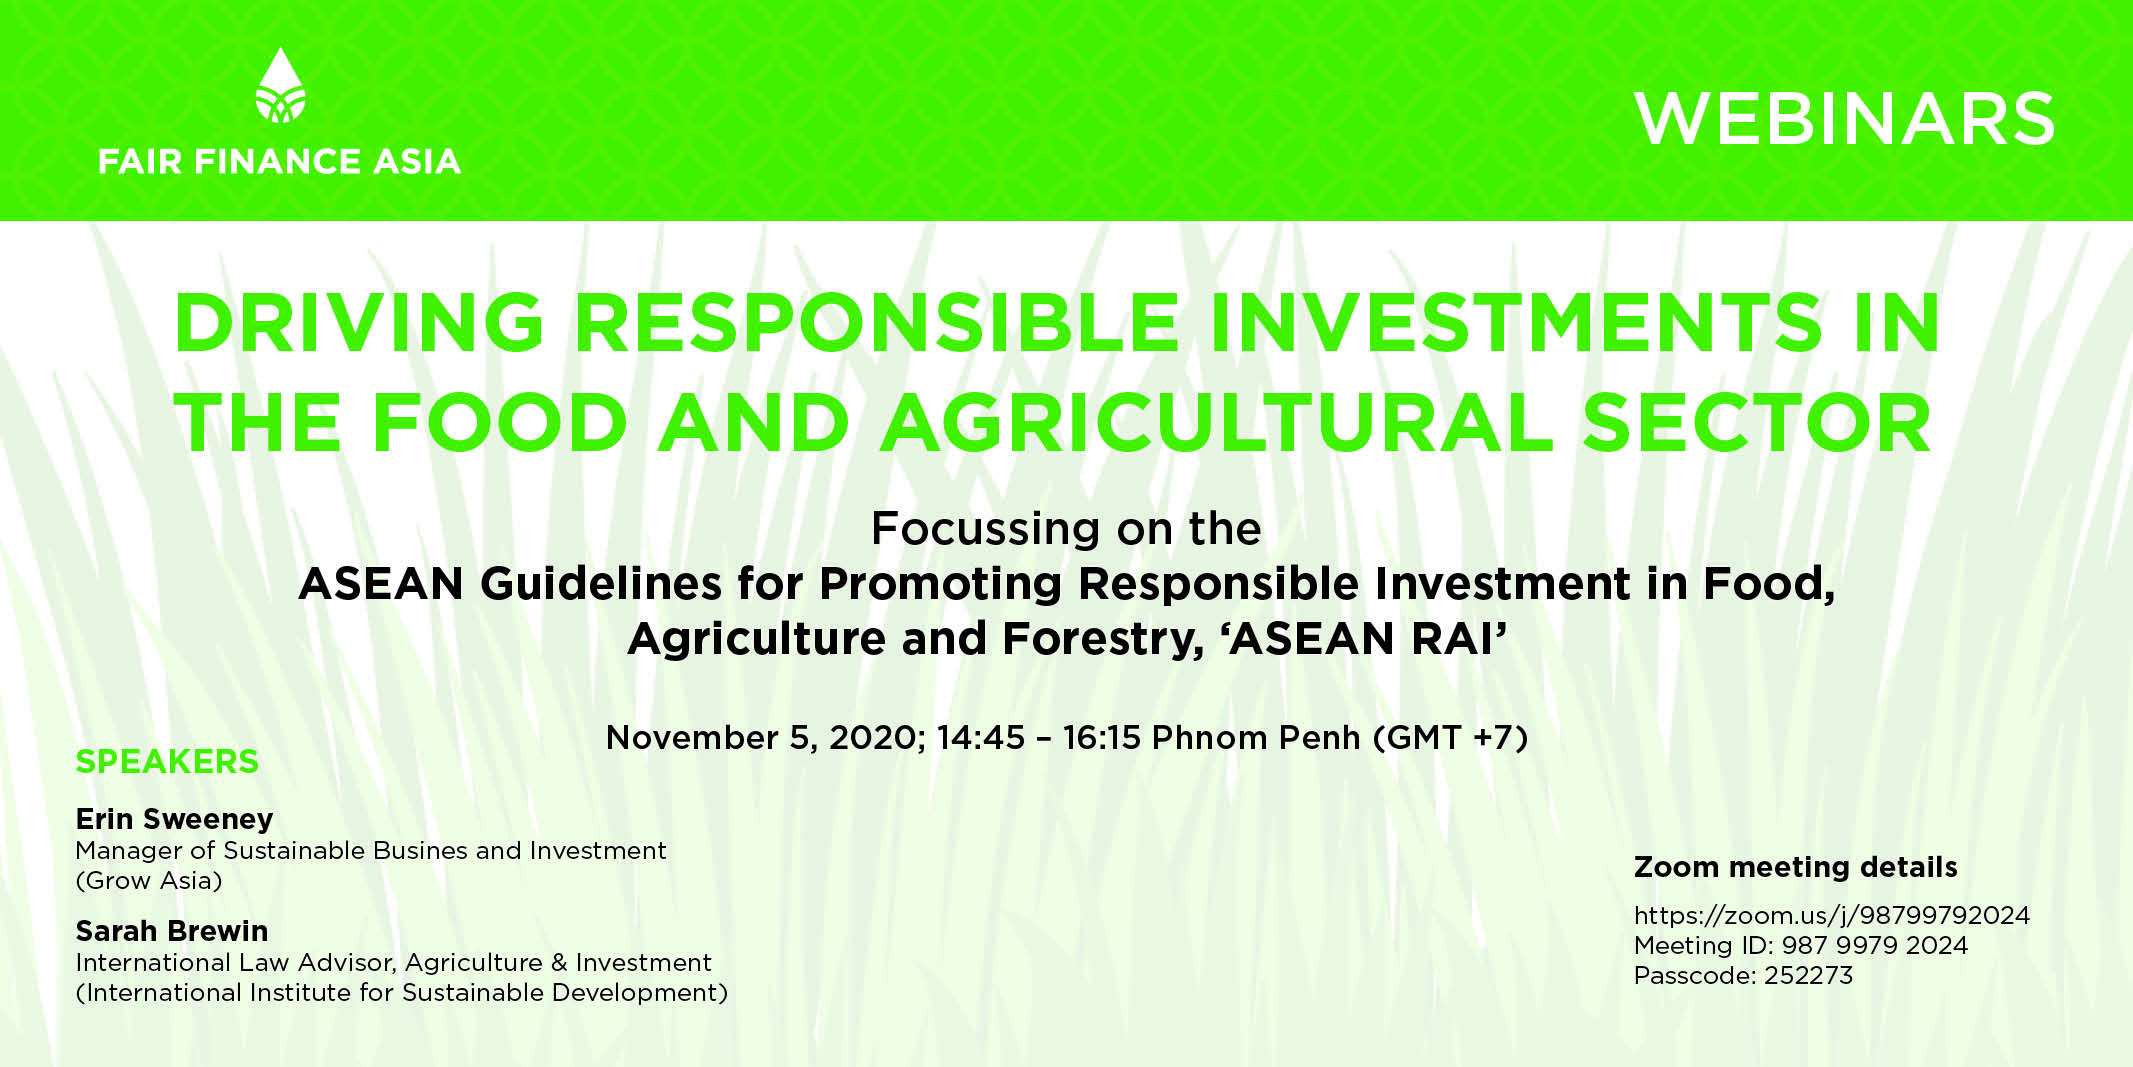 DRIVING RESPONSIBLE INVESTMENTS IN THE FOOD, AGRIBUSINESS, AND FORESTRY SECTORS IN THE ASEAN